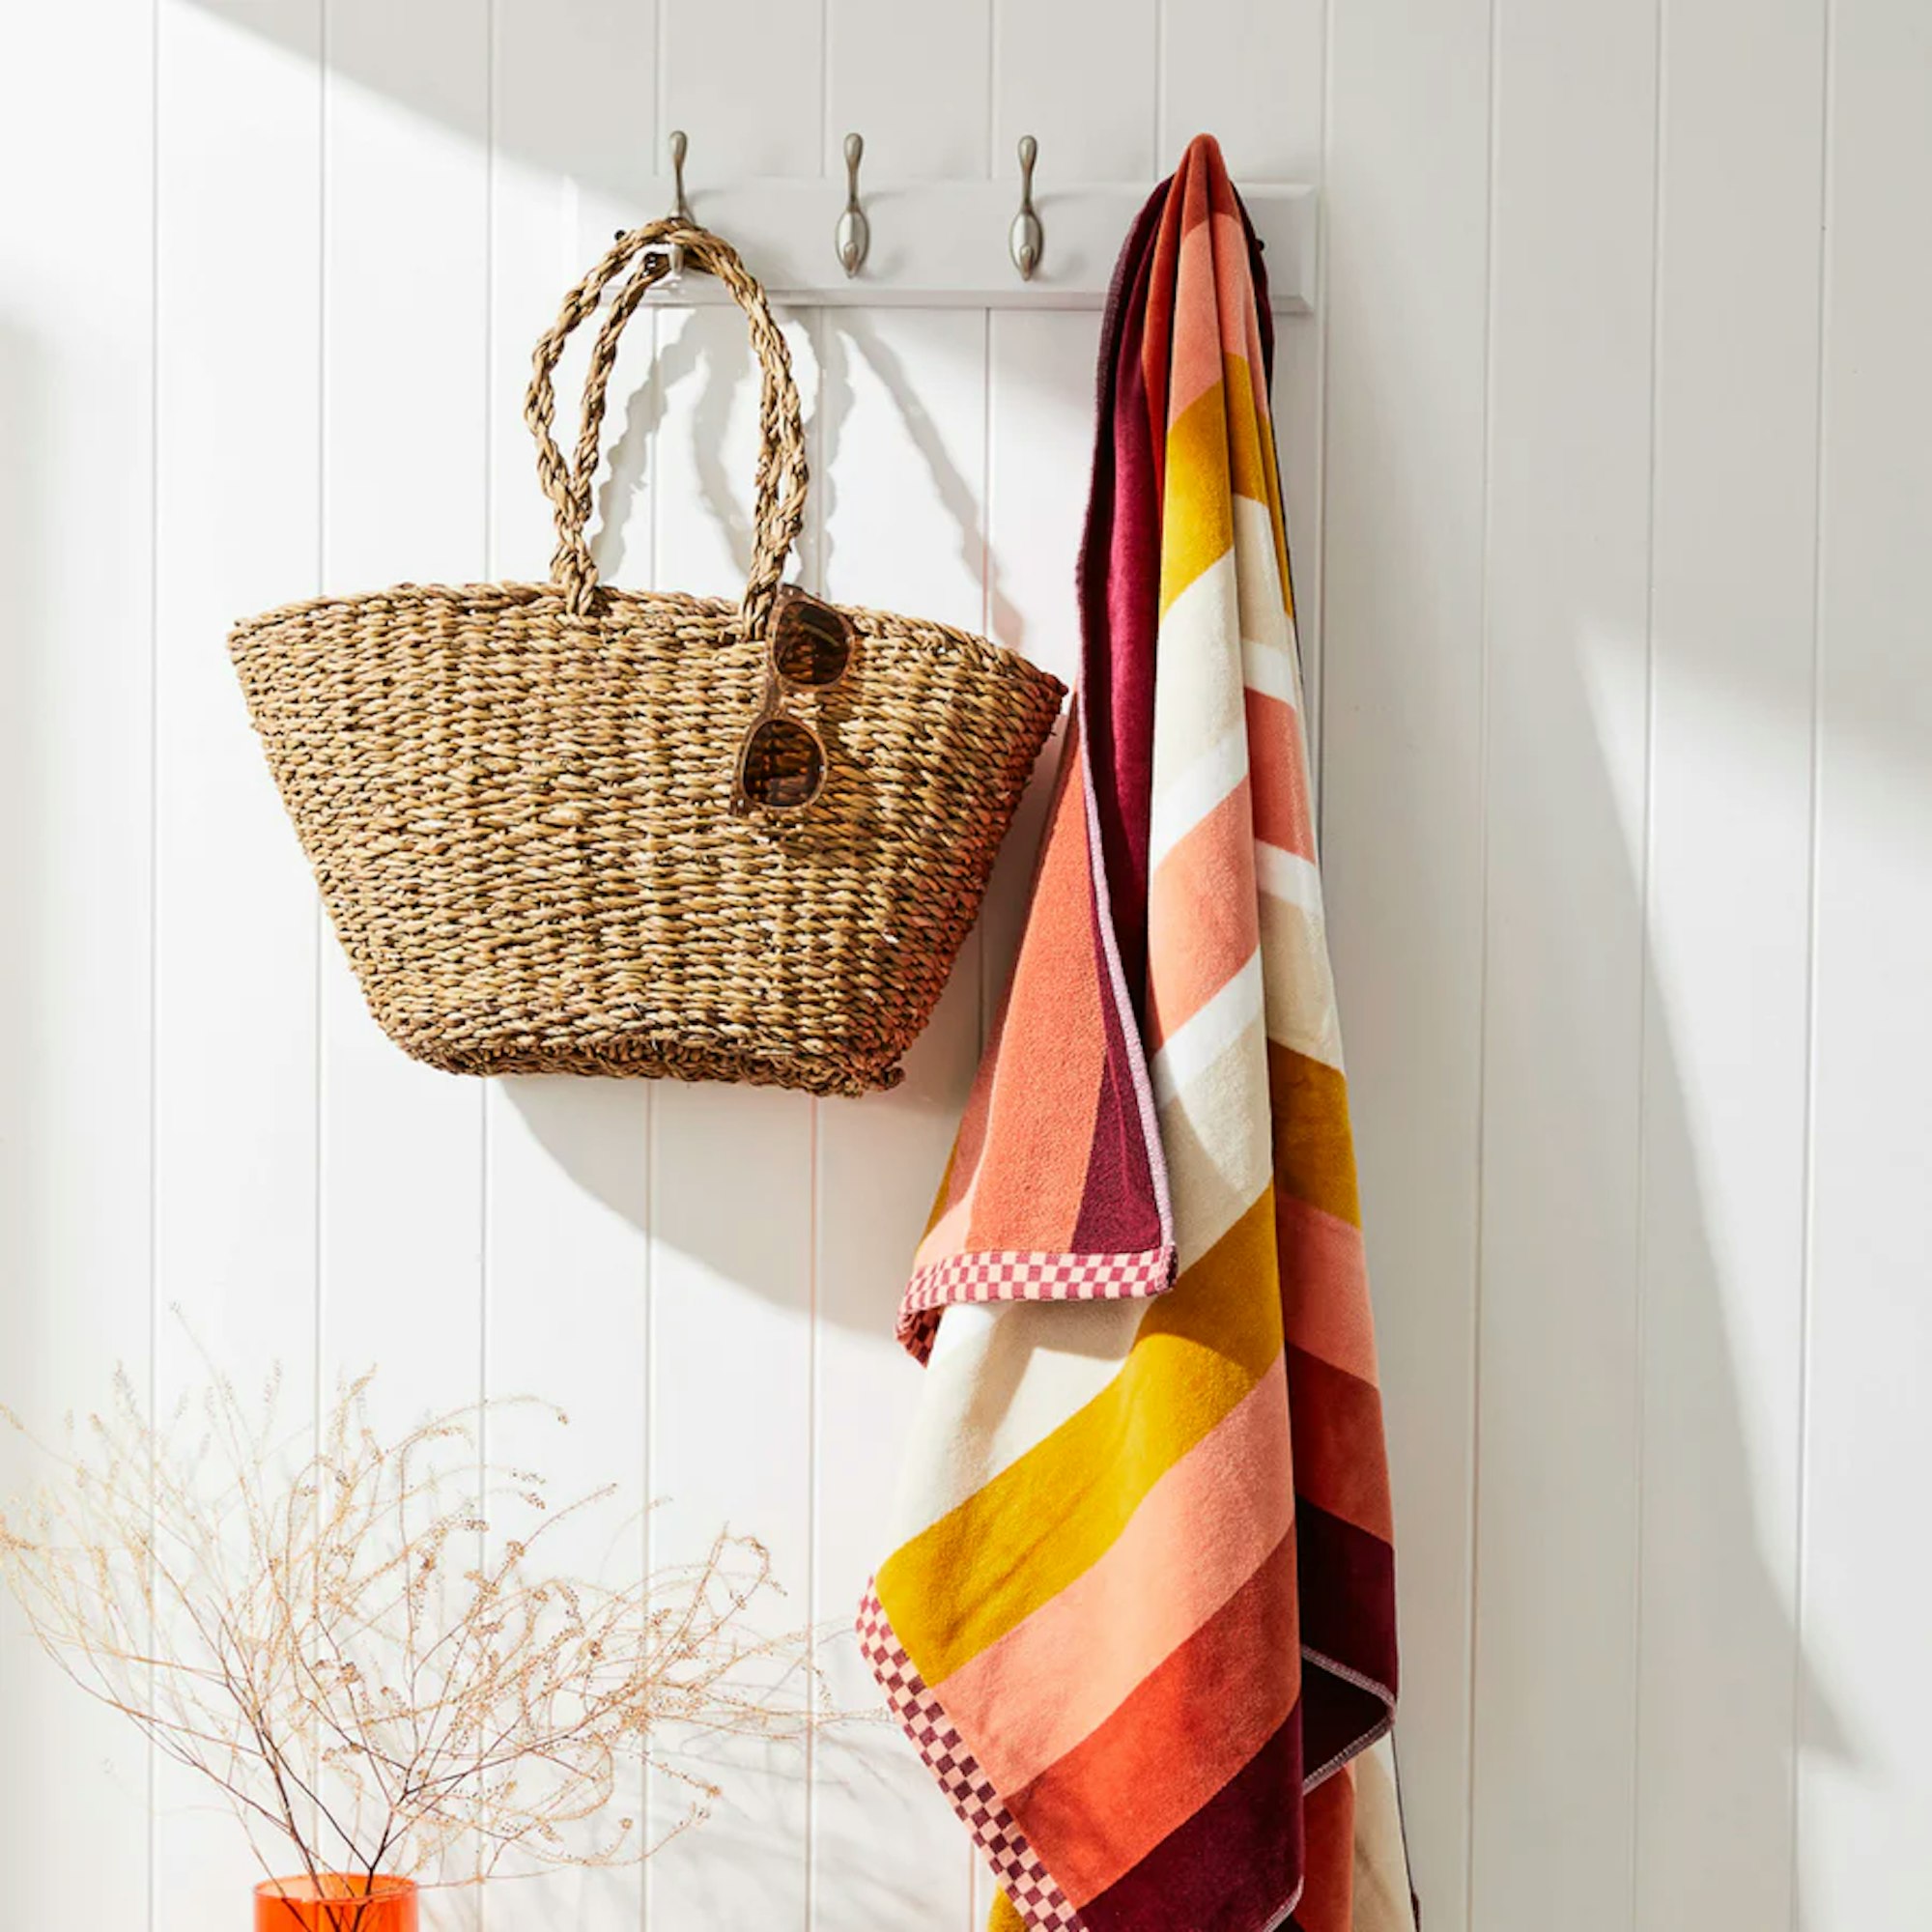 summer bag and blanket hanging from wall hook